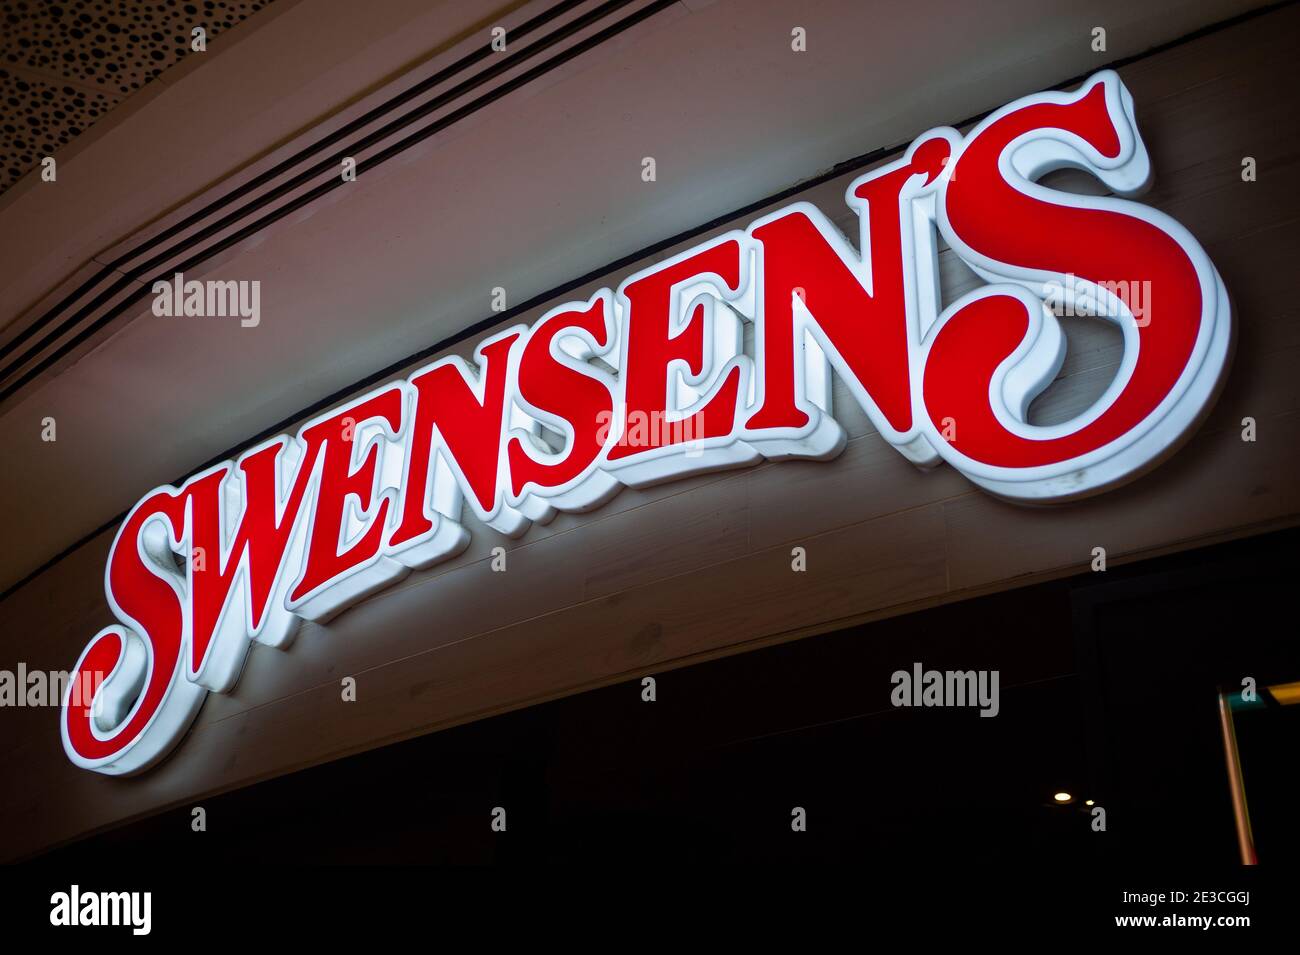 12.03.2020, Singapore, Republic of Singapore, Asia - Illuminated company sign with the lettering and logo of a Swensen's restaurant. Stock Photo